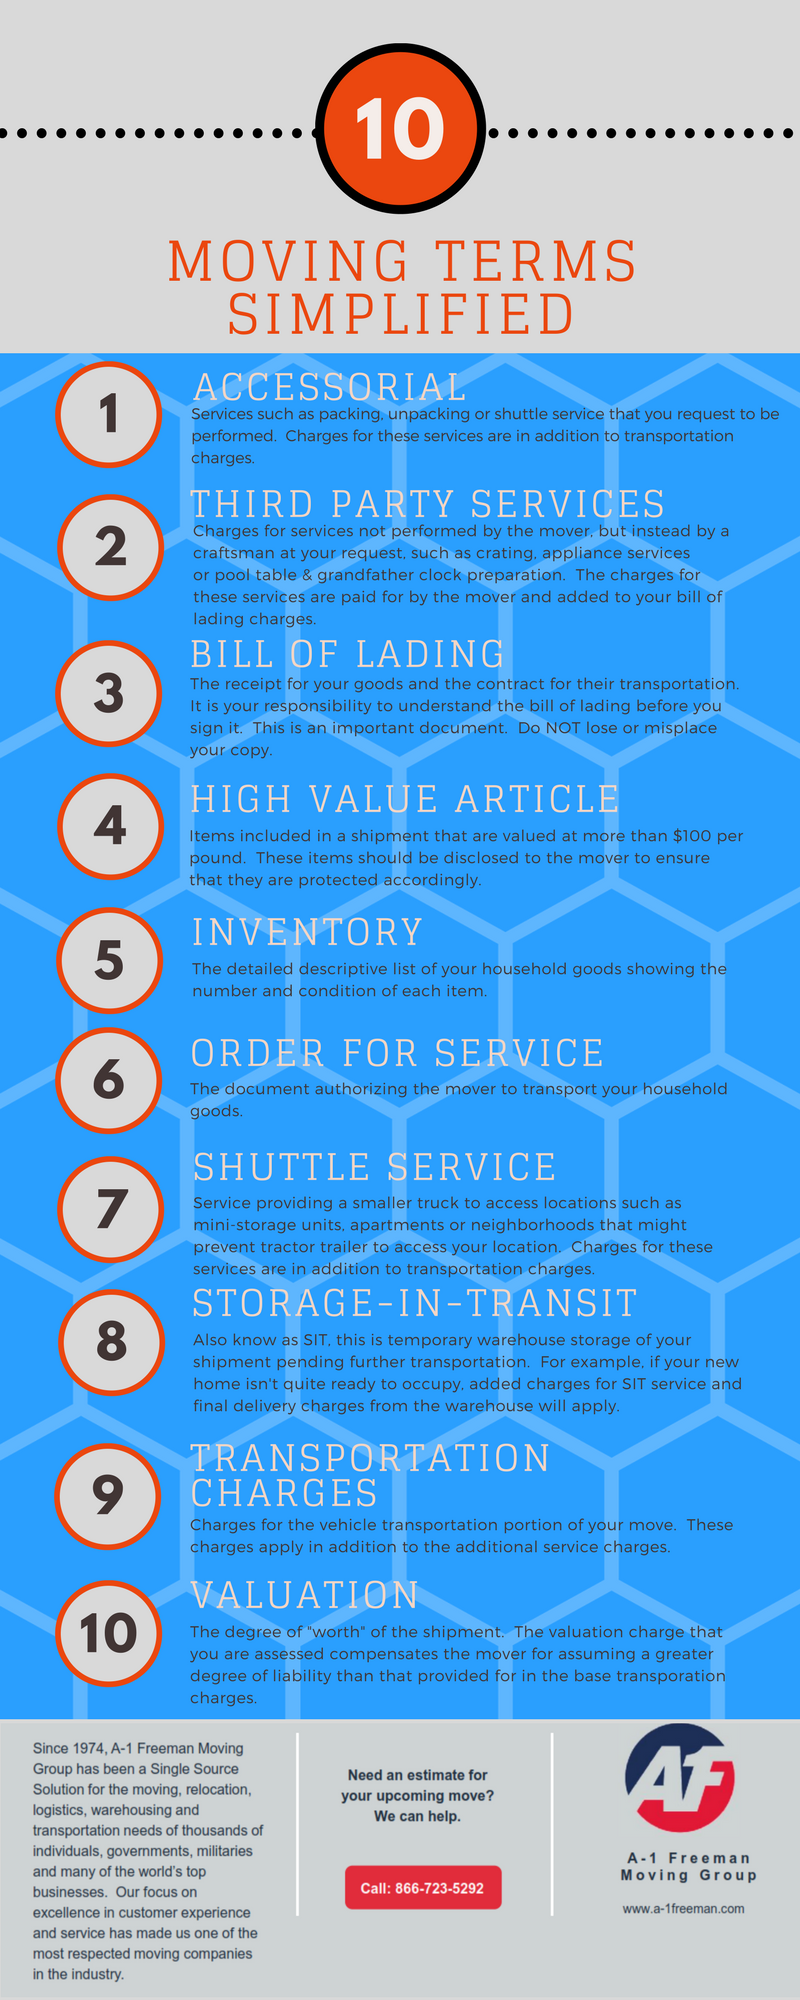 A-1 Freeman Moving Group Oklahoma City Moving Terms Infographic